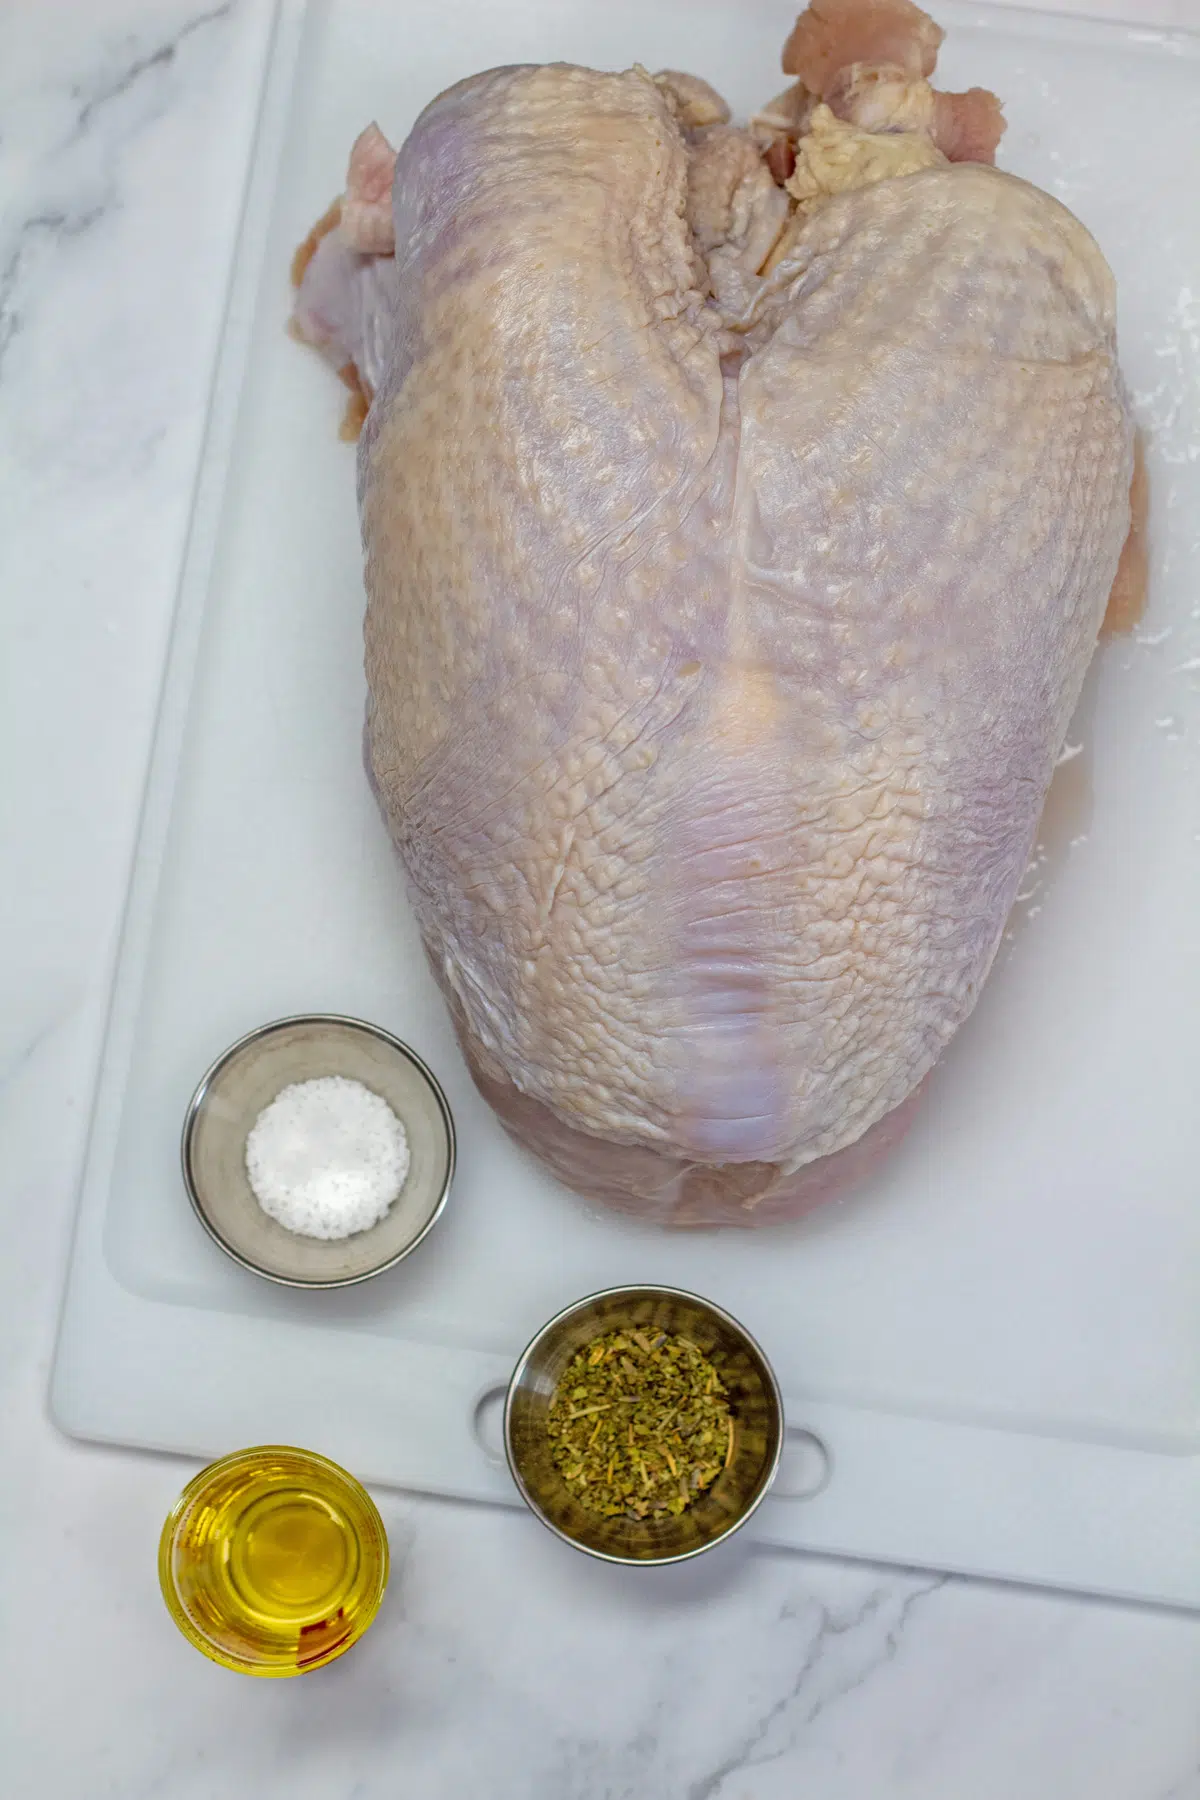 Oven roasted turkey breast ingredients with bone-in skin-on turkey breast, olive oil, salt, and poultry seasoning.